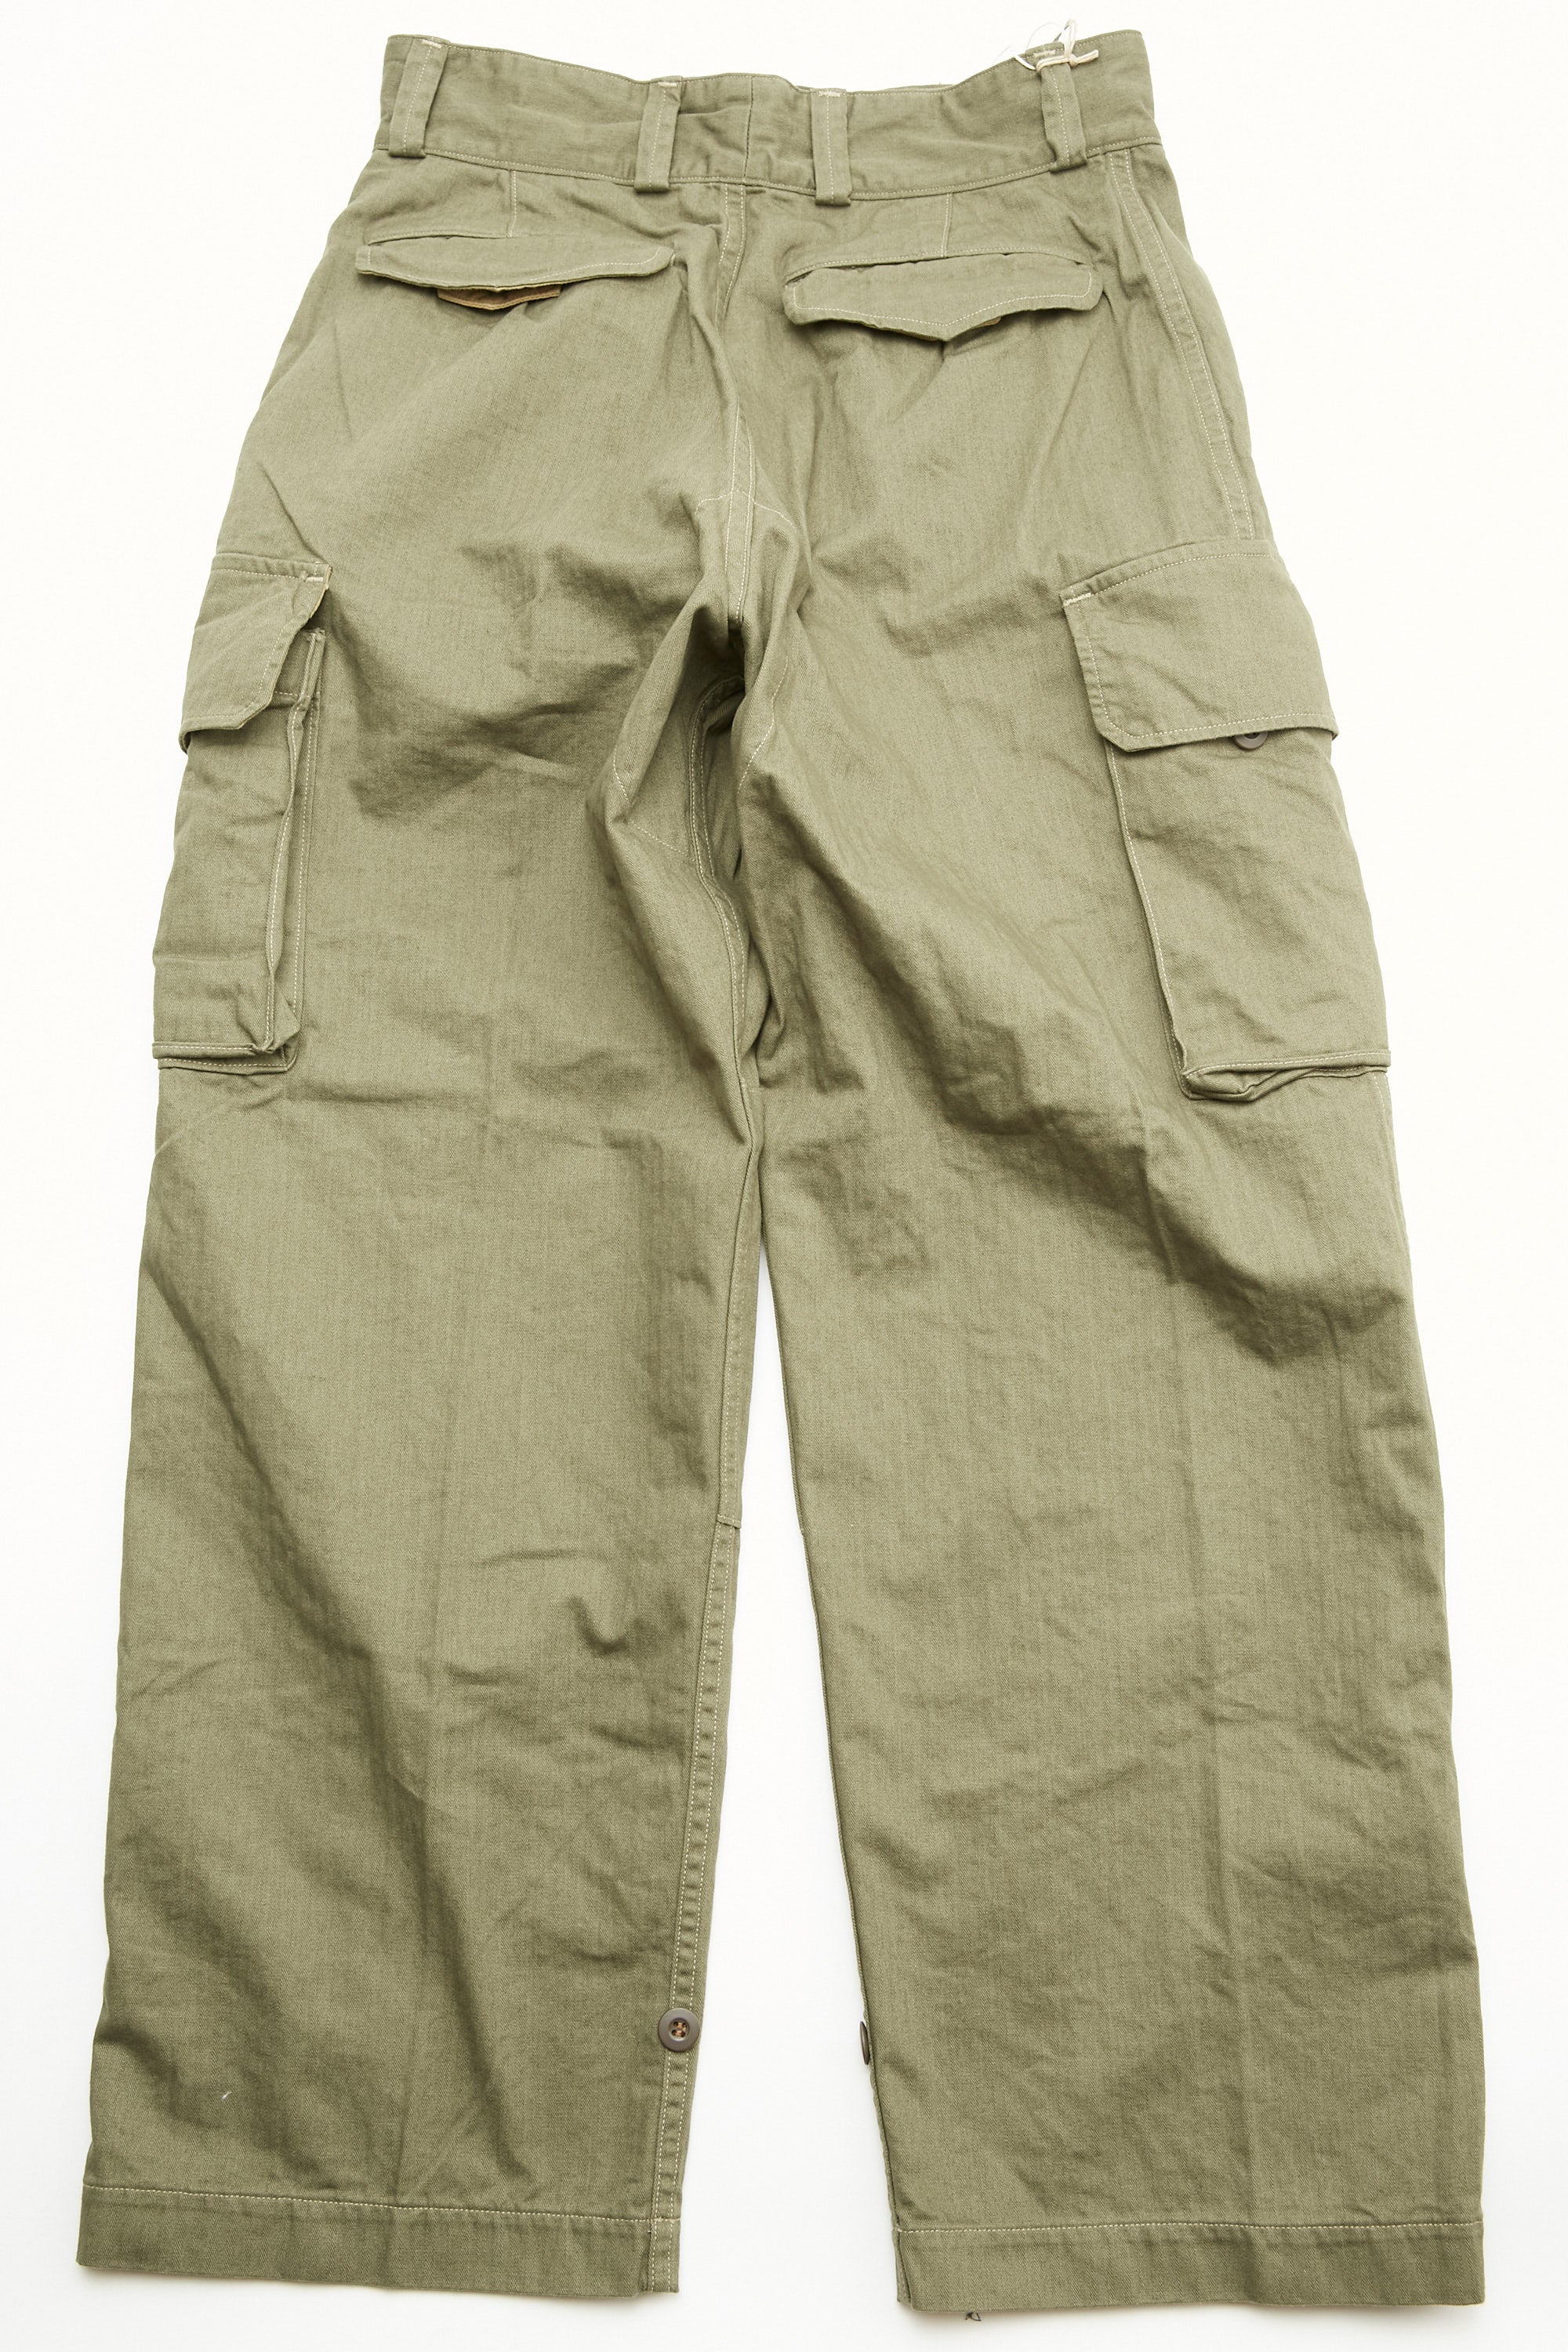 orSlow M-47 FRENCH ARMY CARGO PANTS (UNISEX) - Army 